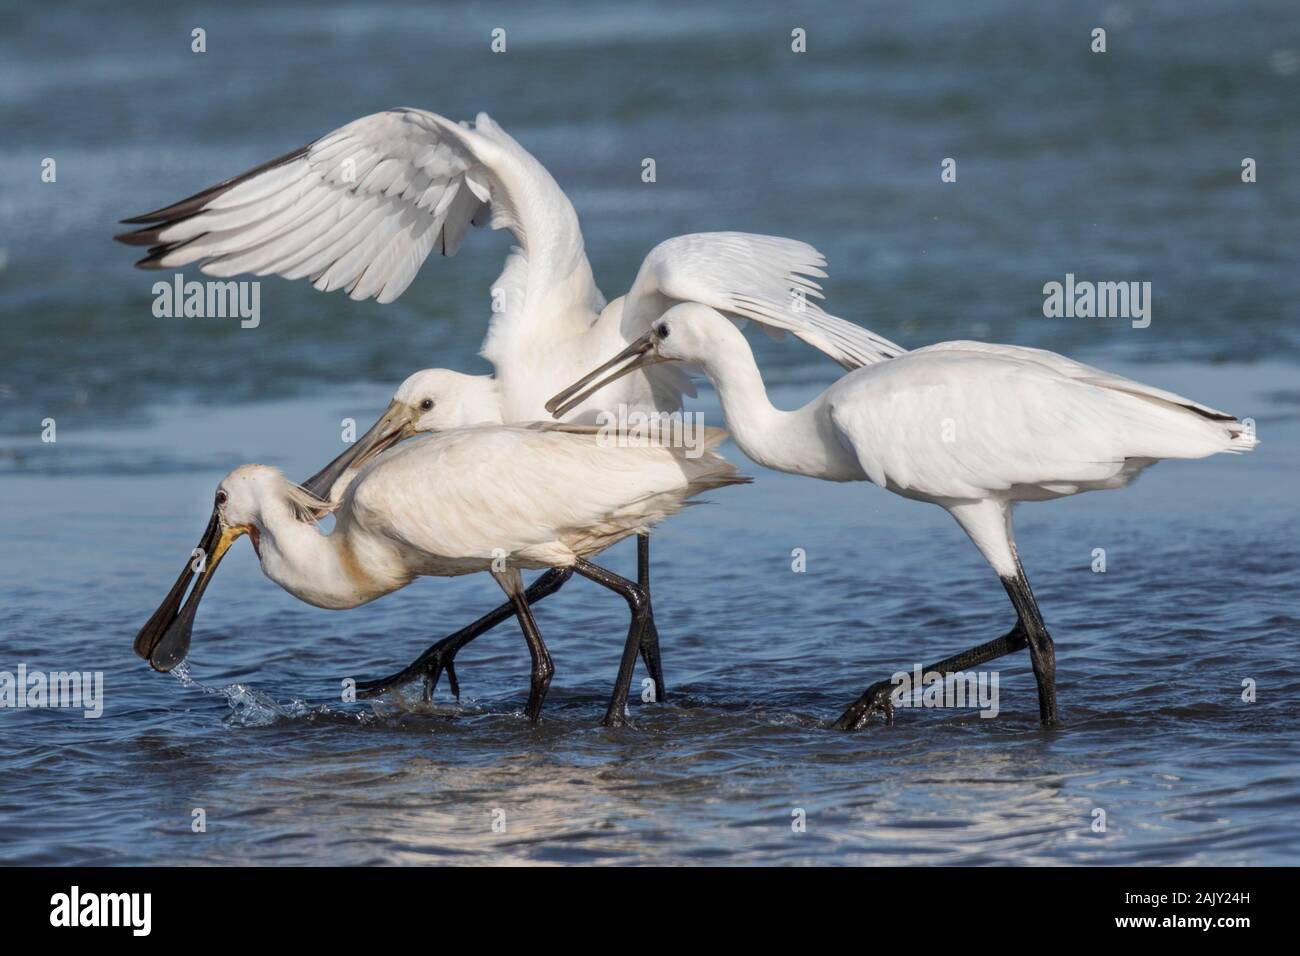 Juvenile Spoonbill begging food from Adult Stock Photo